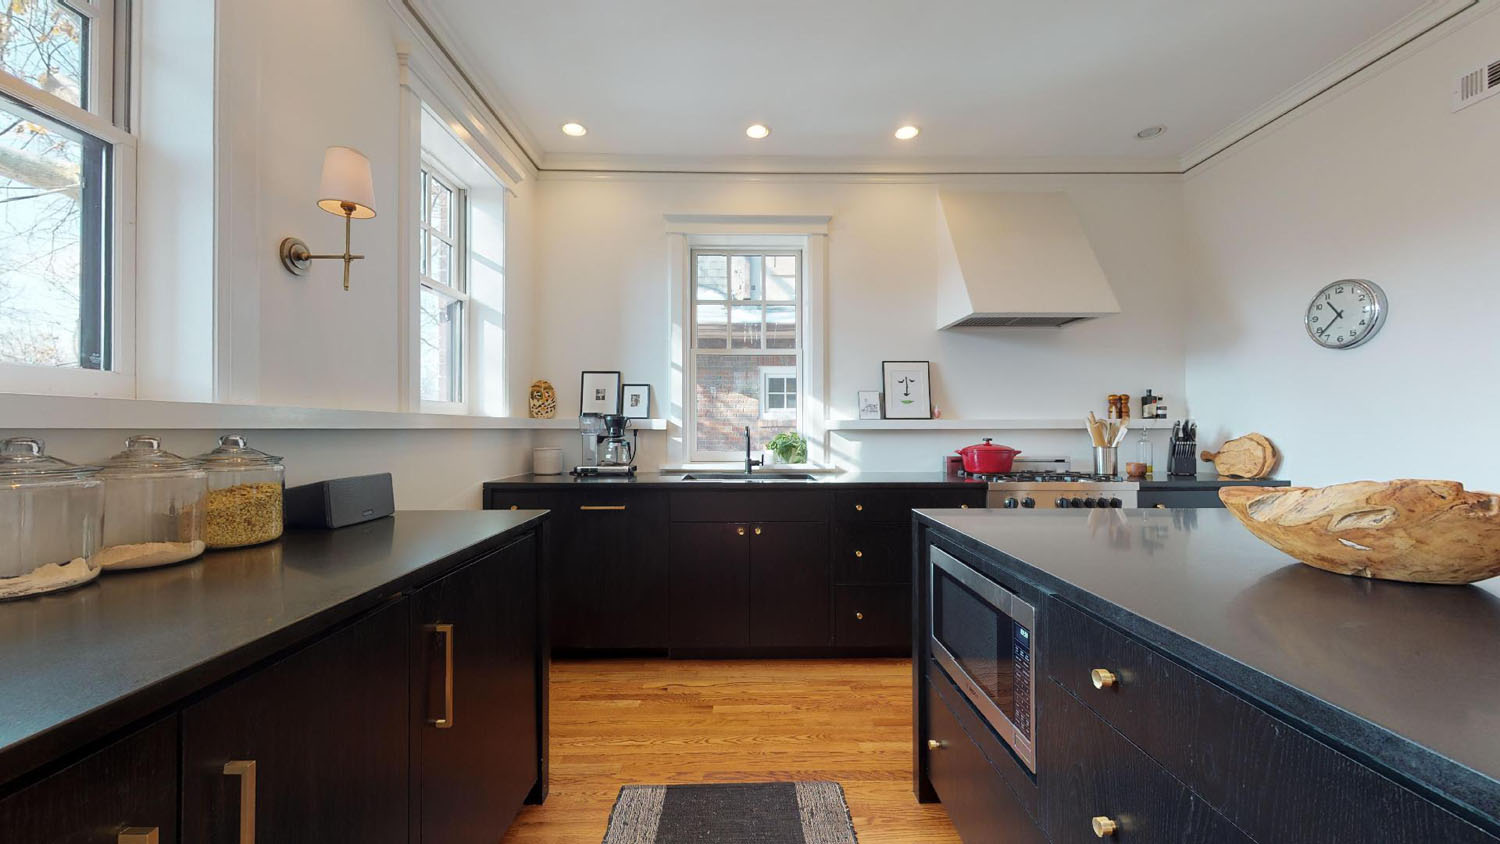 Trend Spotting Kitchens That Don't Look Like Kitchens   Dawn ...